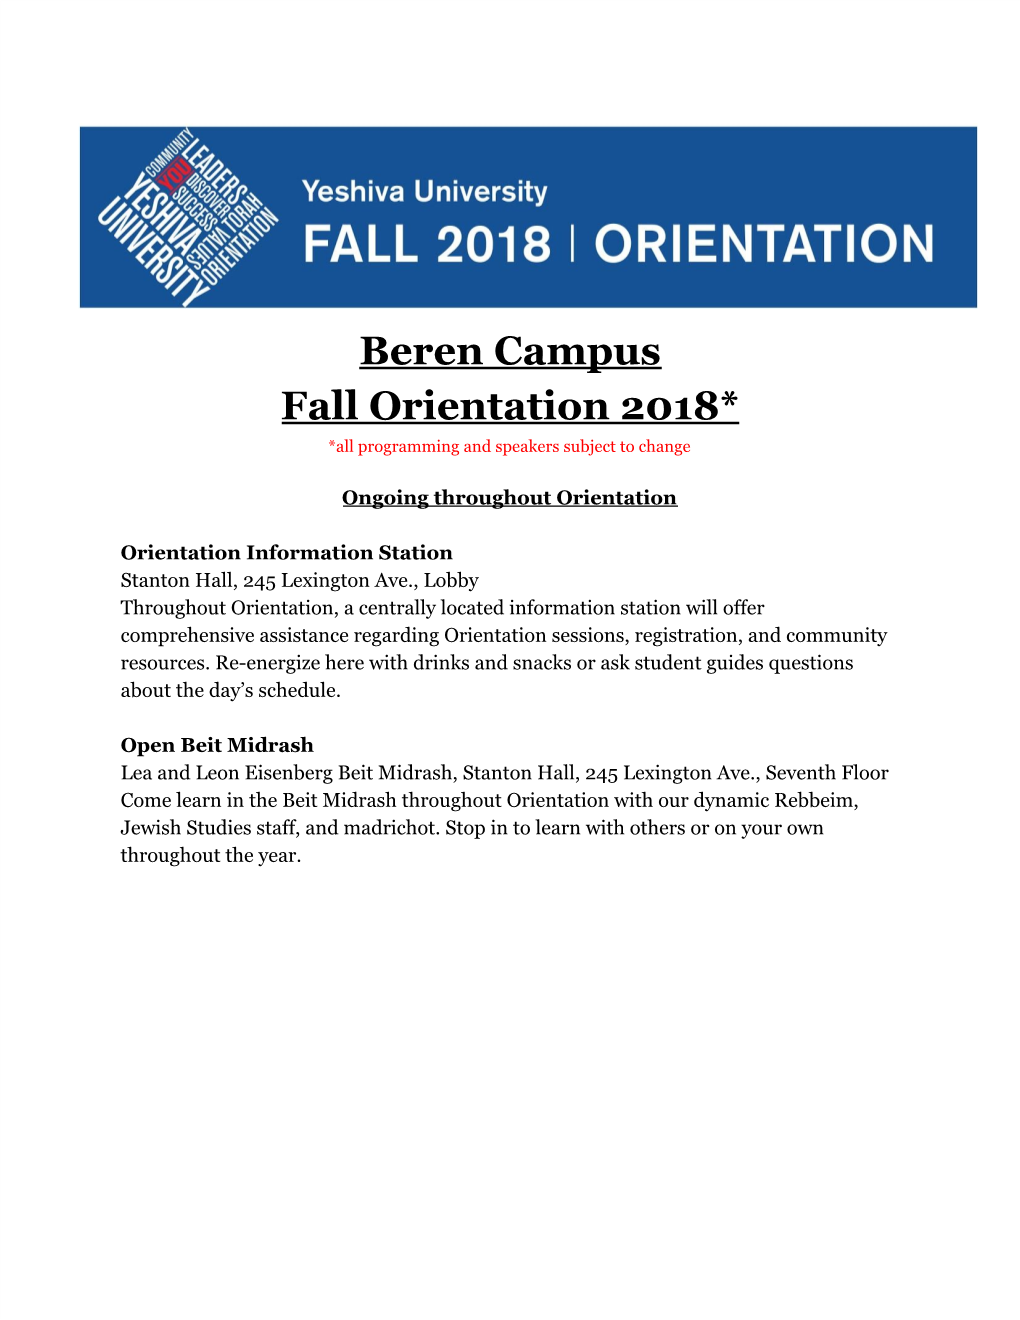 Beren Campus Fall Orientation 2018* *All Programming and Speakers Subject to Change